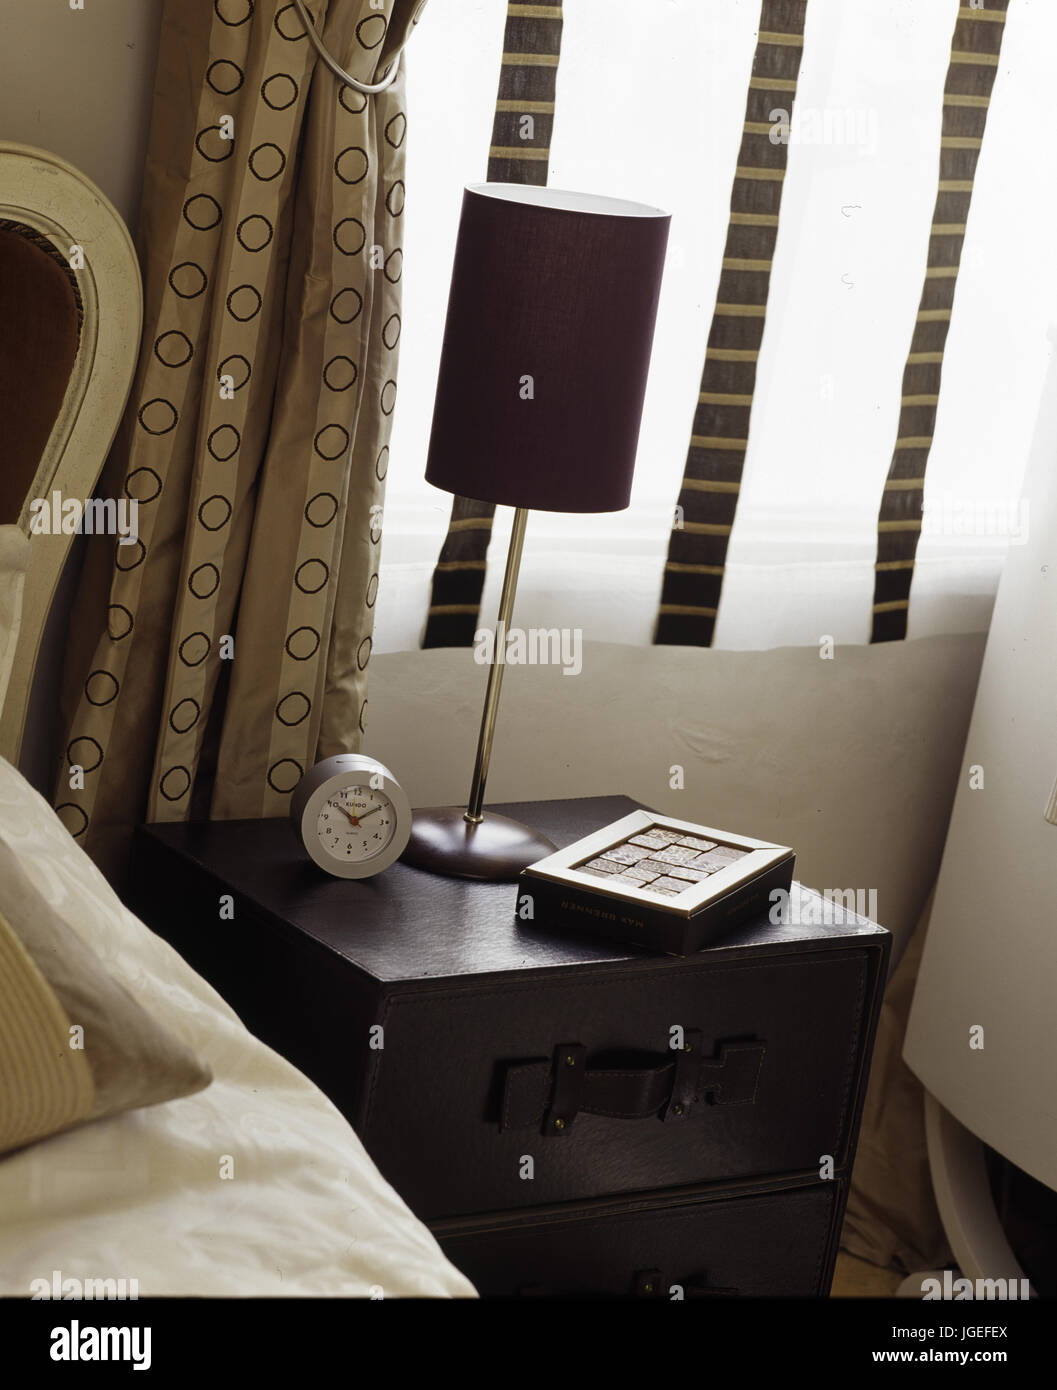 Bedside table with lamp and clock Stock Photo